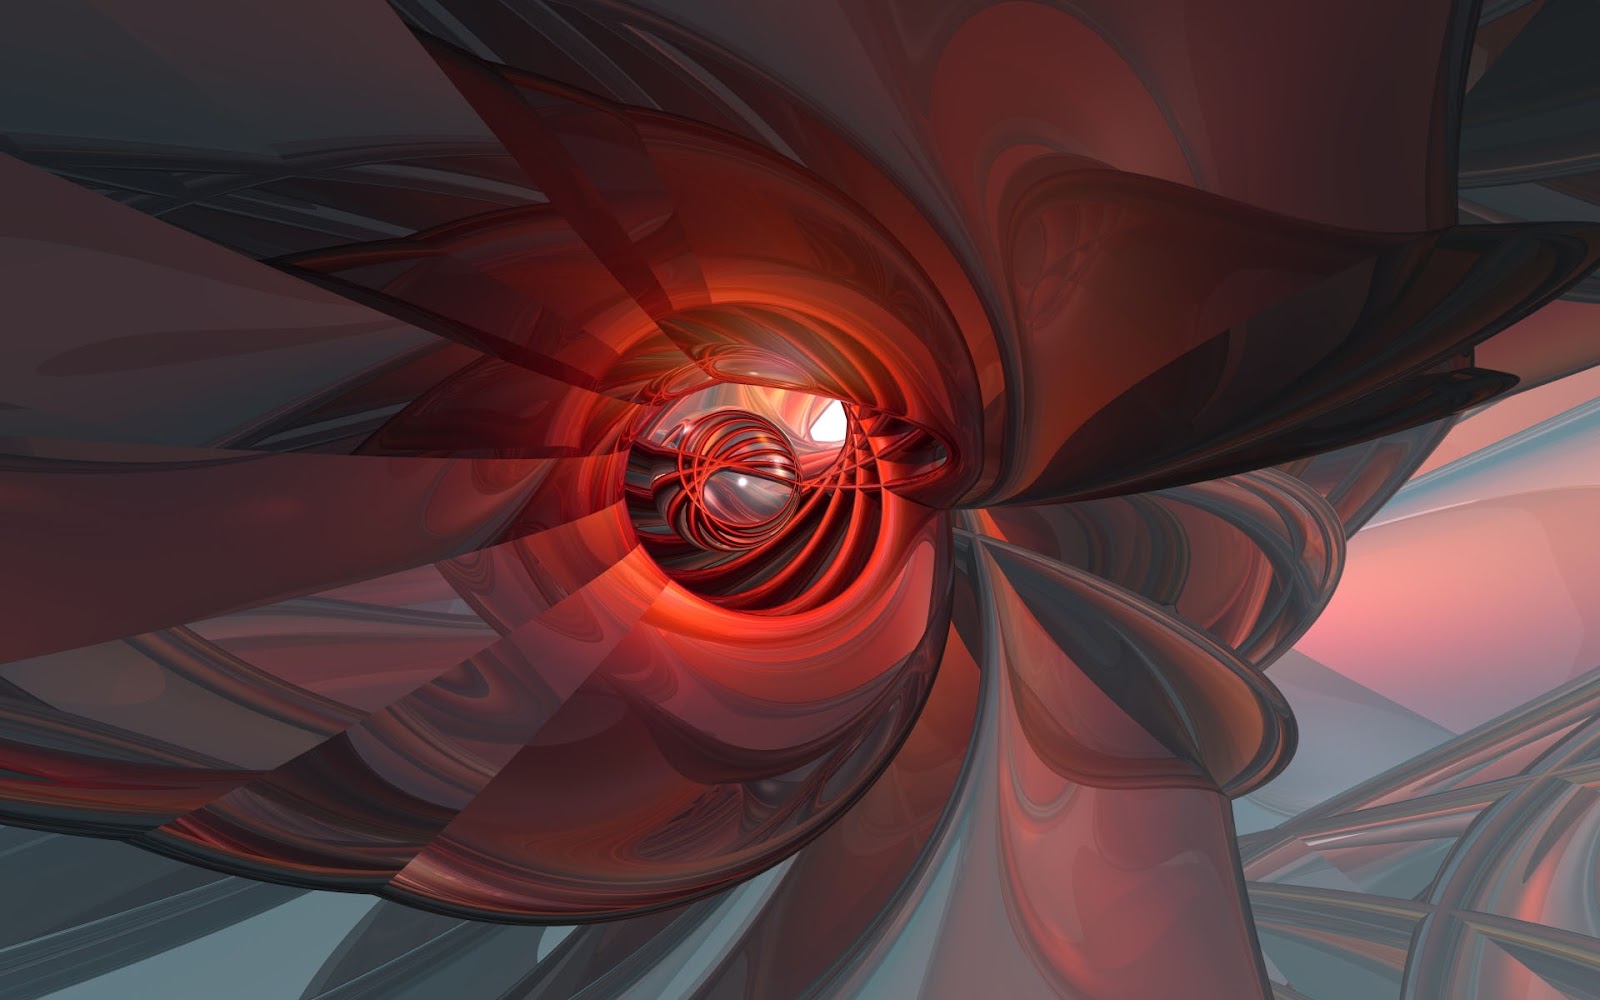 amazing wallpapers 3d,red,fractal art,cg artwork,anime,graphics